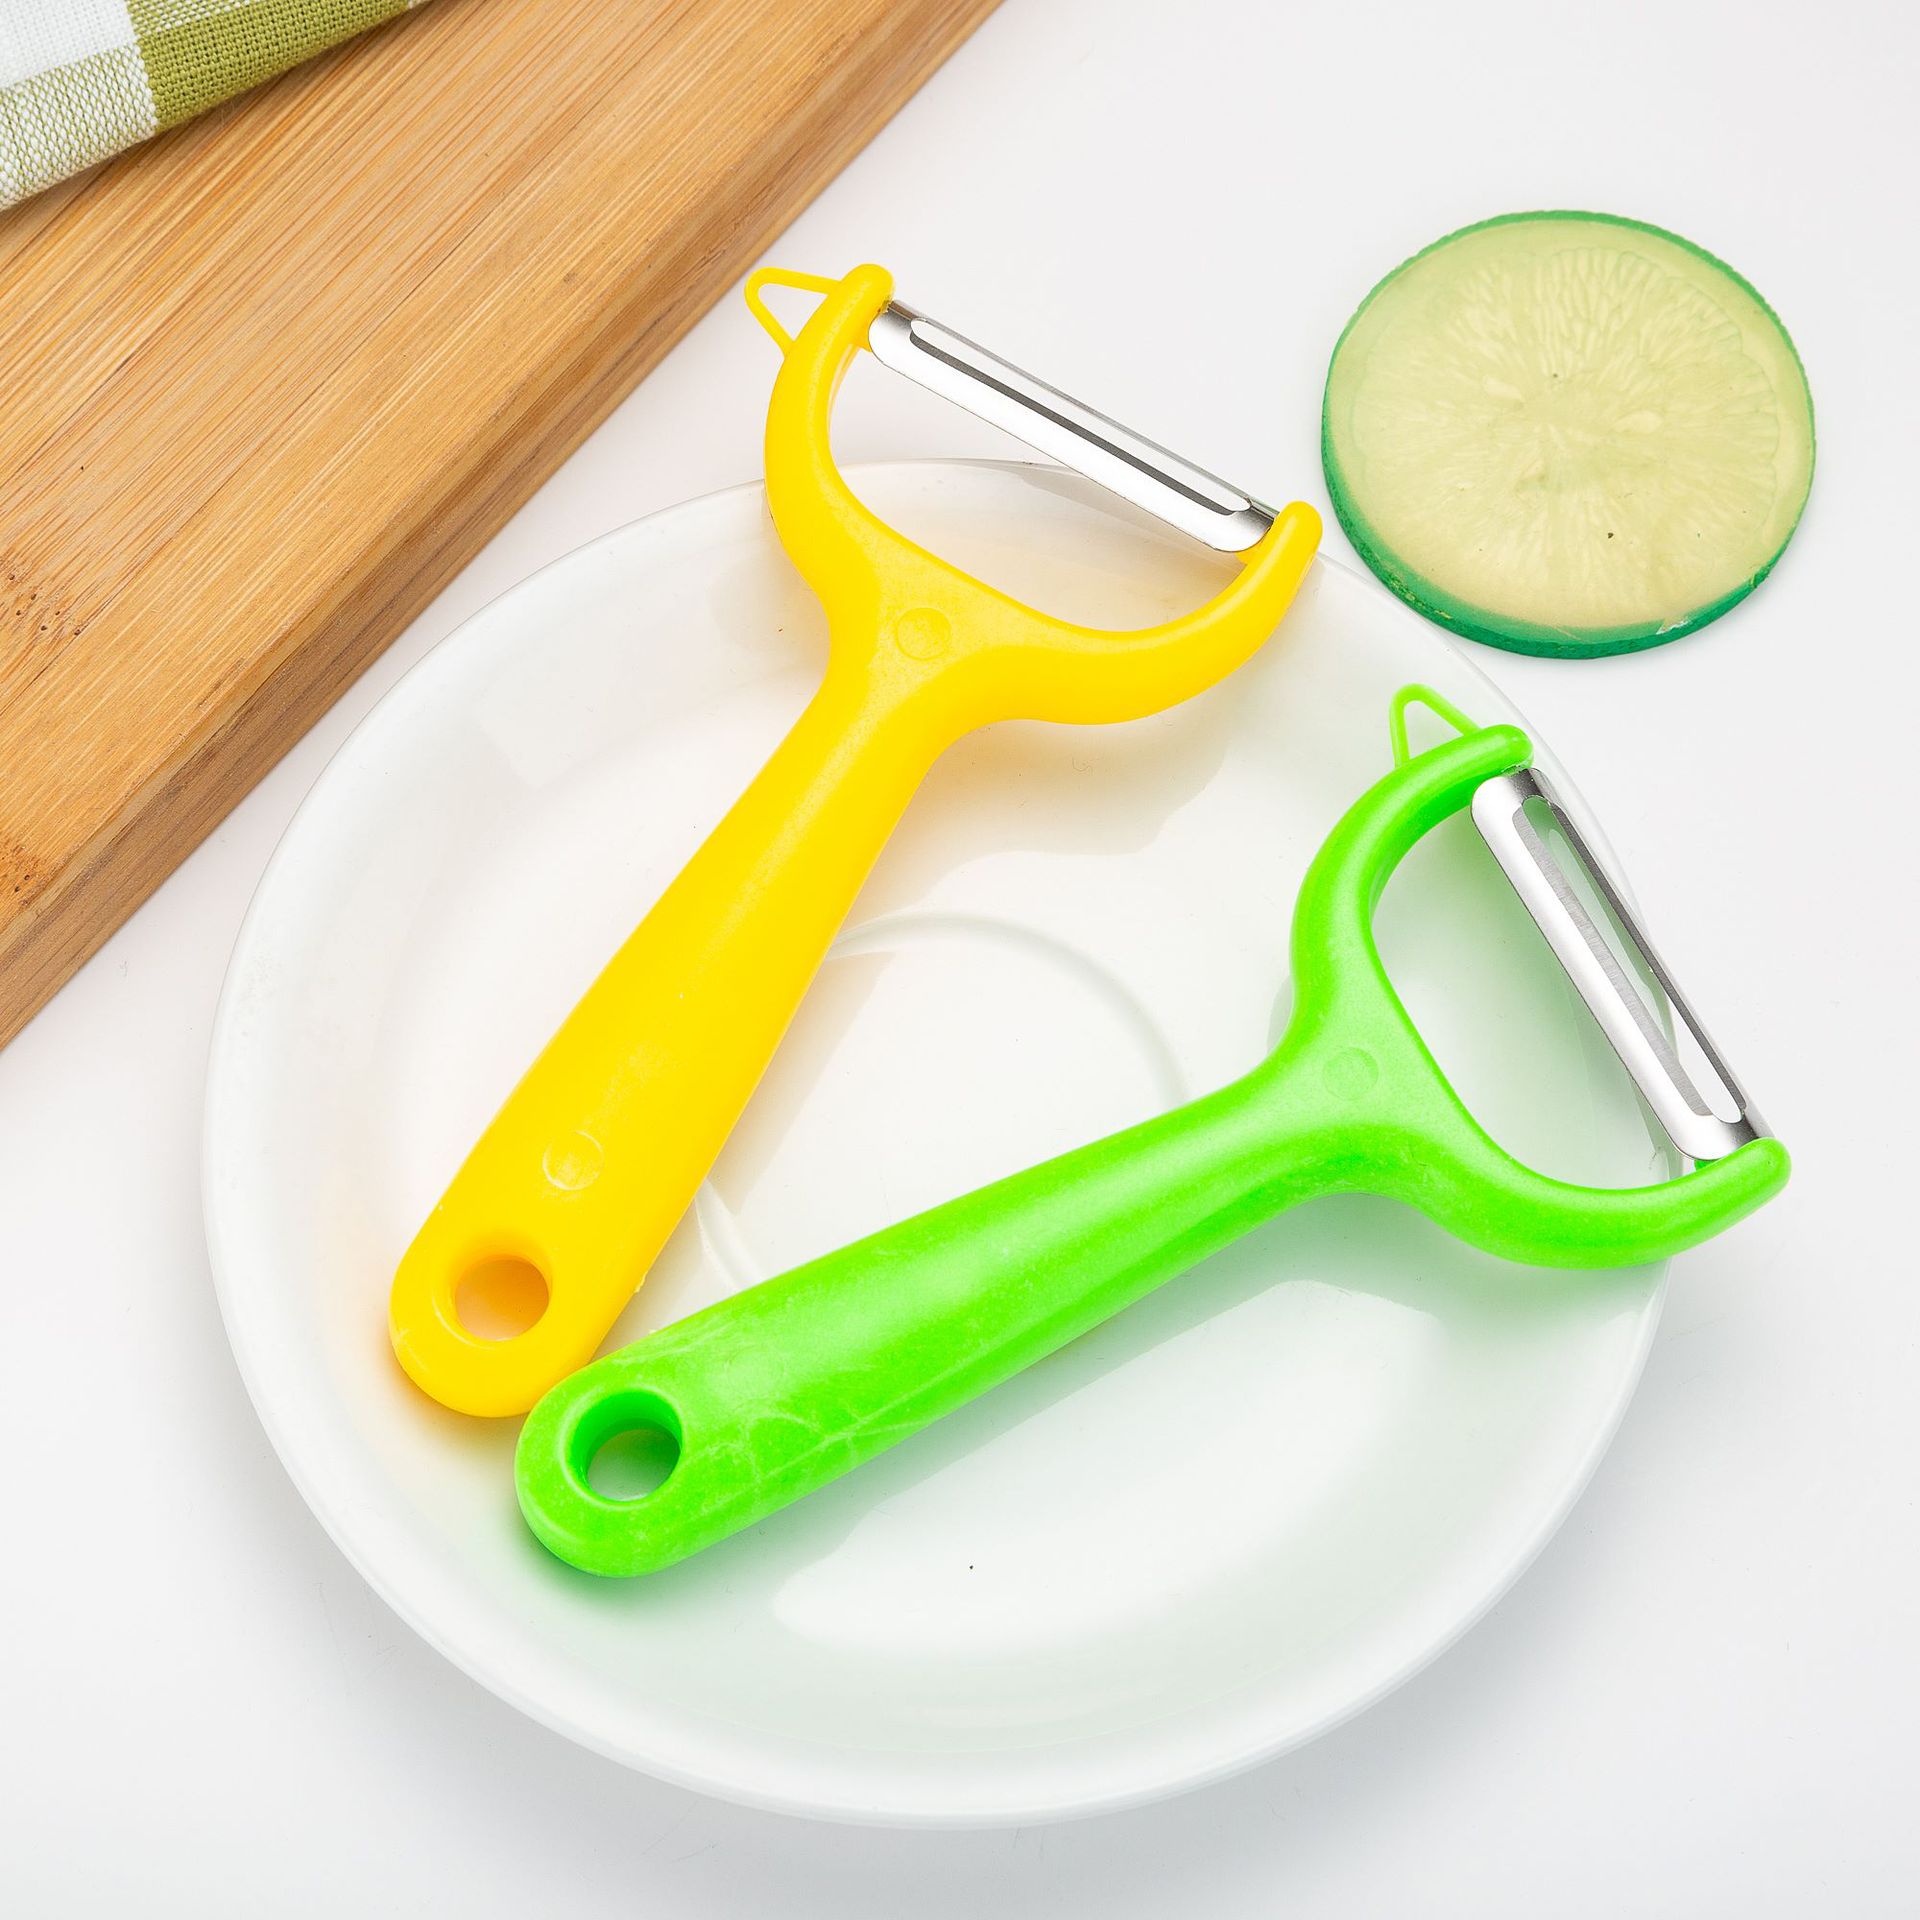 Multifunctional Paring Knife Stainless Steel Customized Two-in-One Peeler Tools for Cutting Fruit Potato Parer Apple Peeler